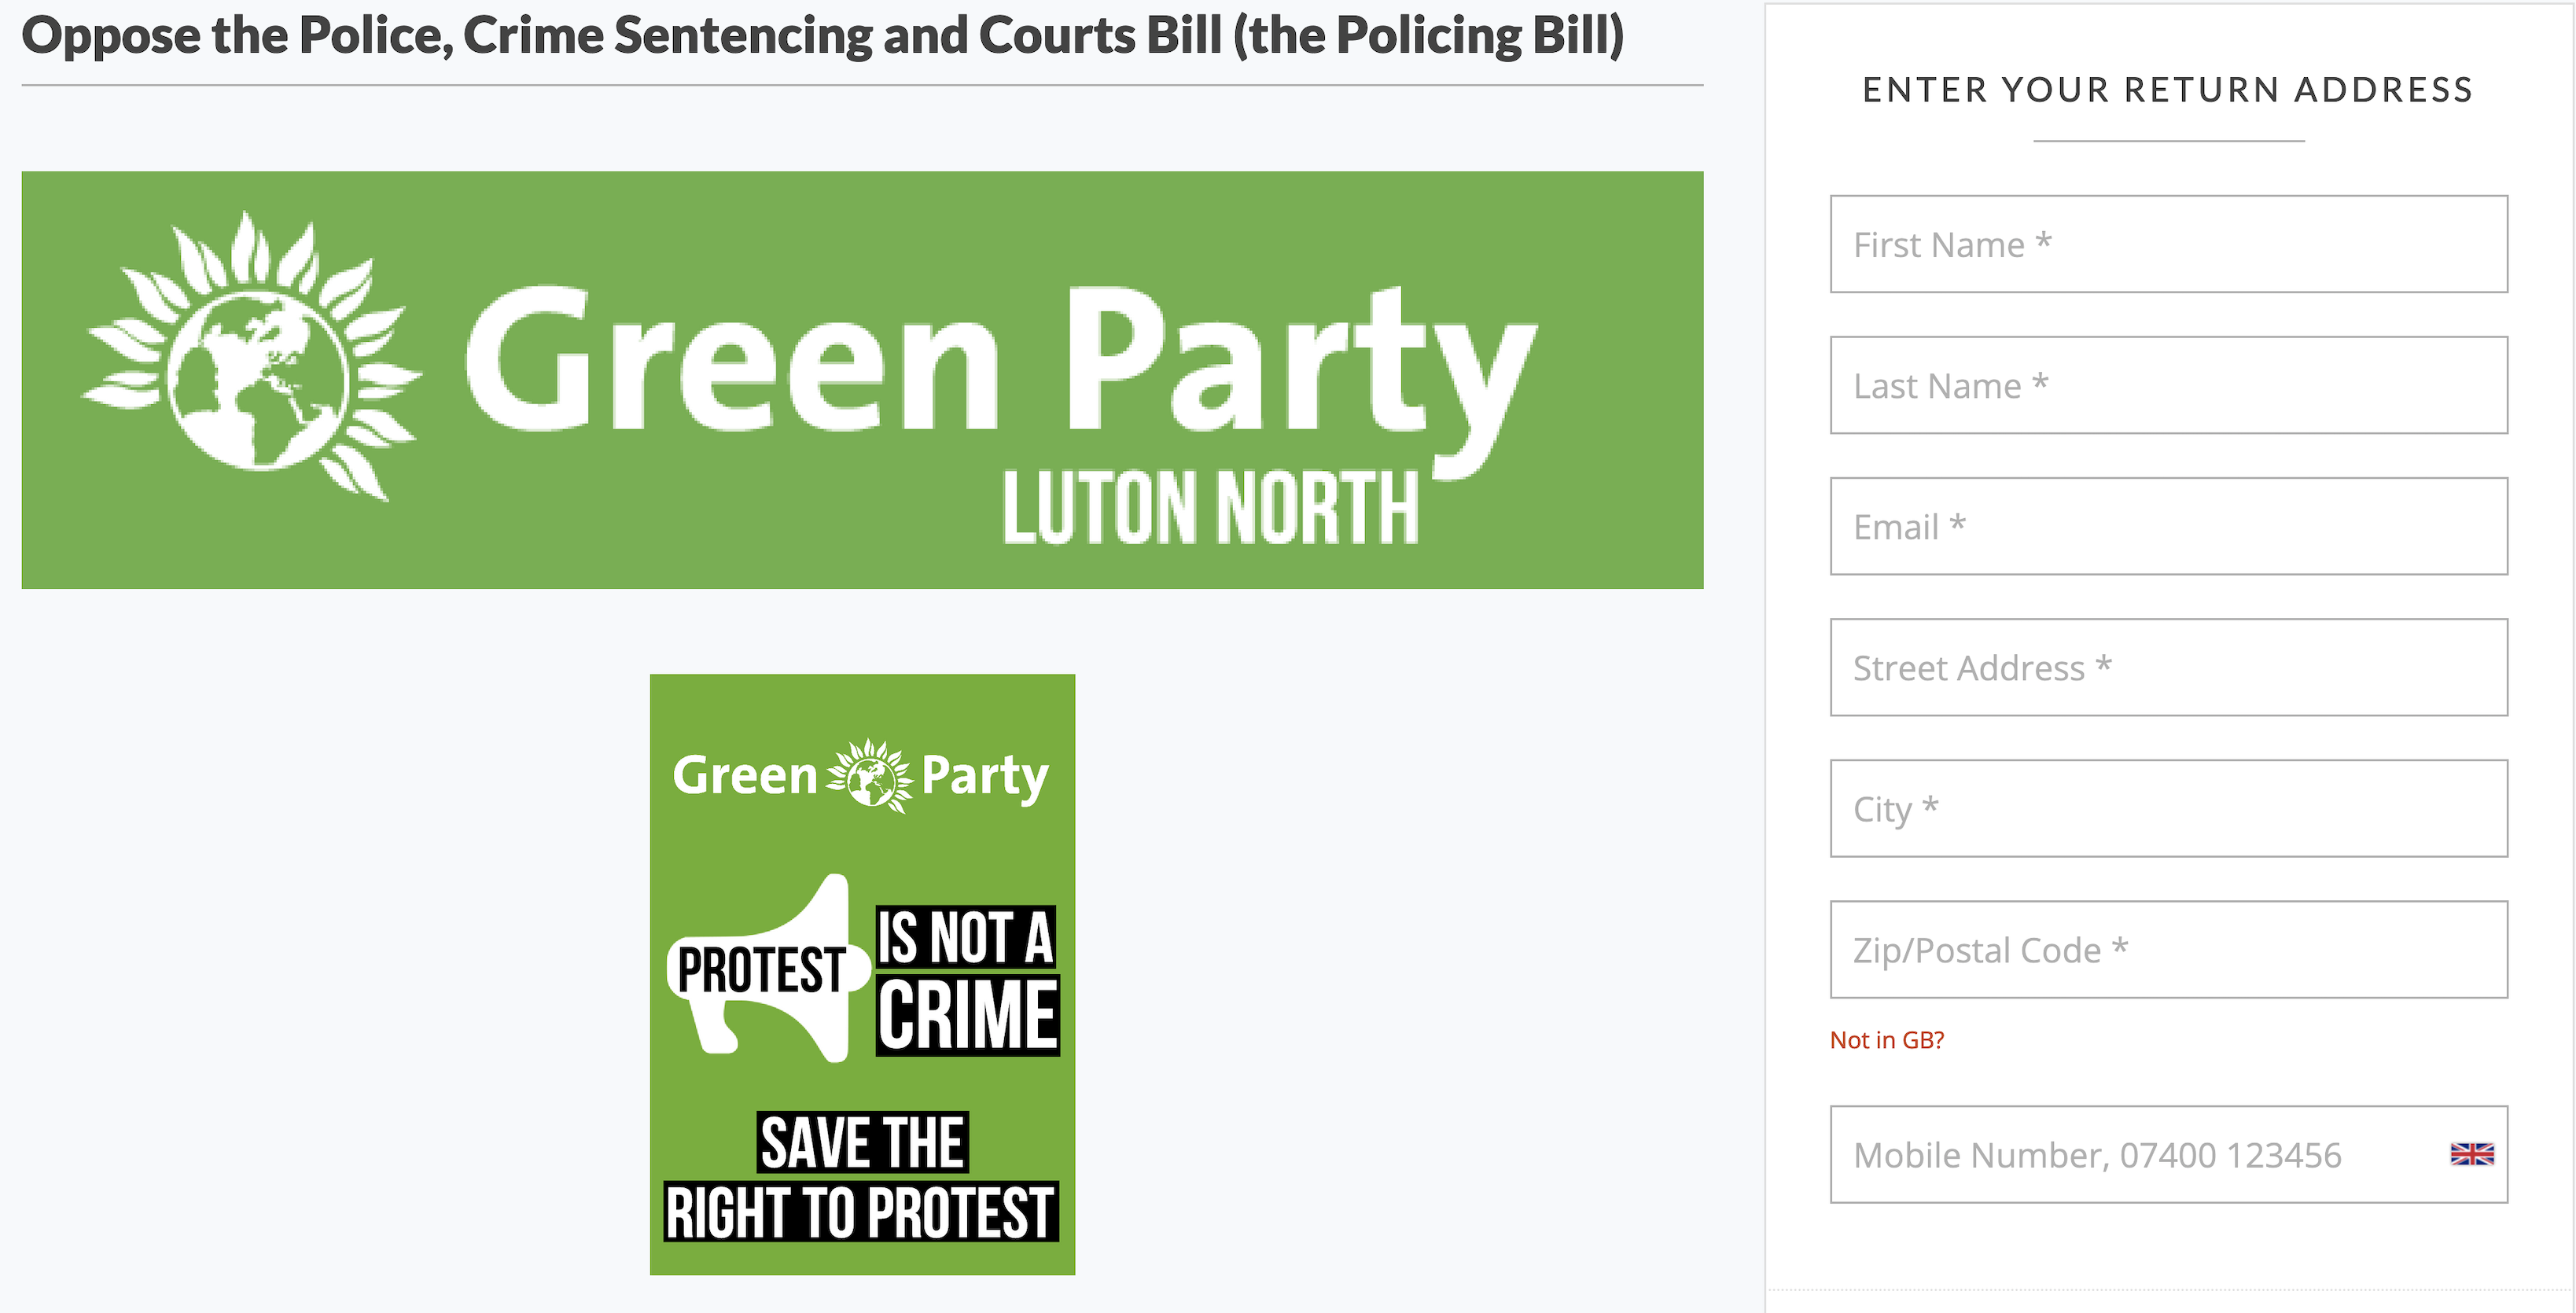 Luton North Oppose the Police, Crime, Sentencing & Courts Bill email campaign Image